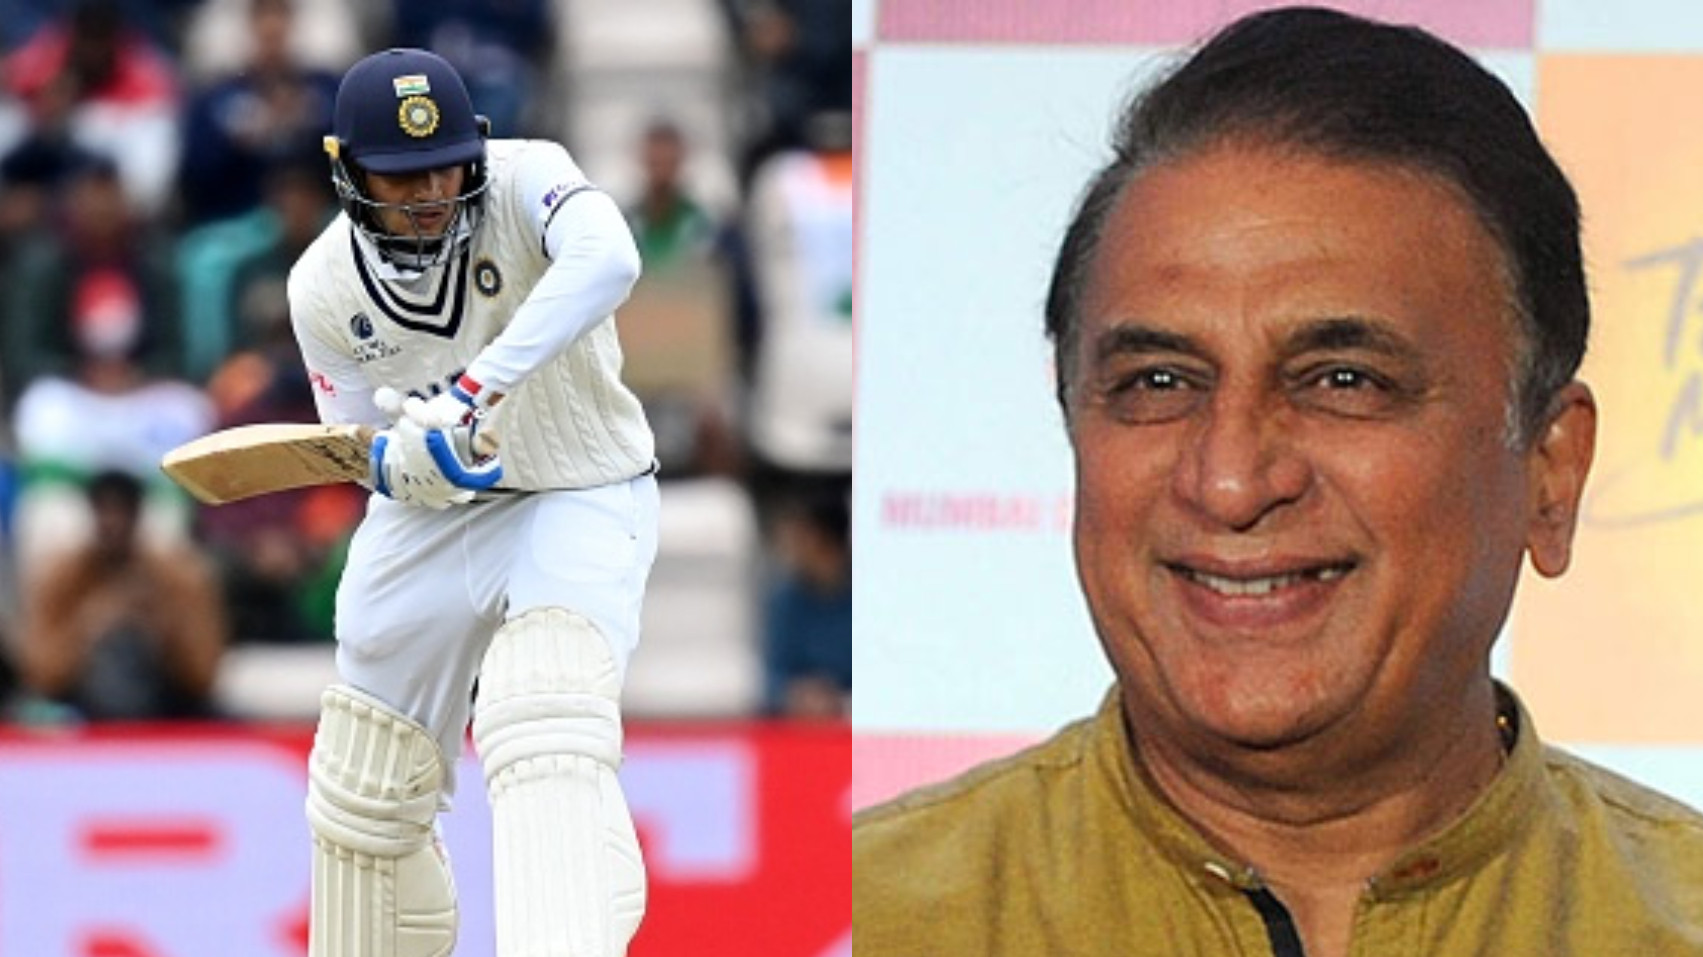 WTC 2021 Final: Shubman Gill has the temperament to become a great player, says Sunil Gavaskar